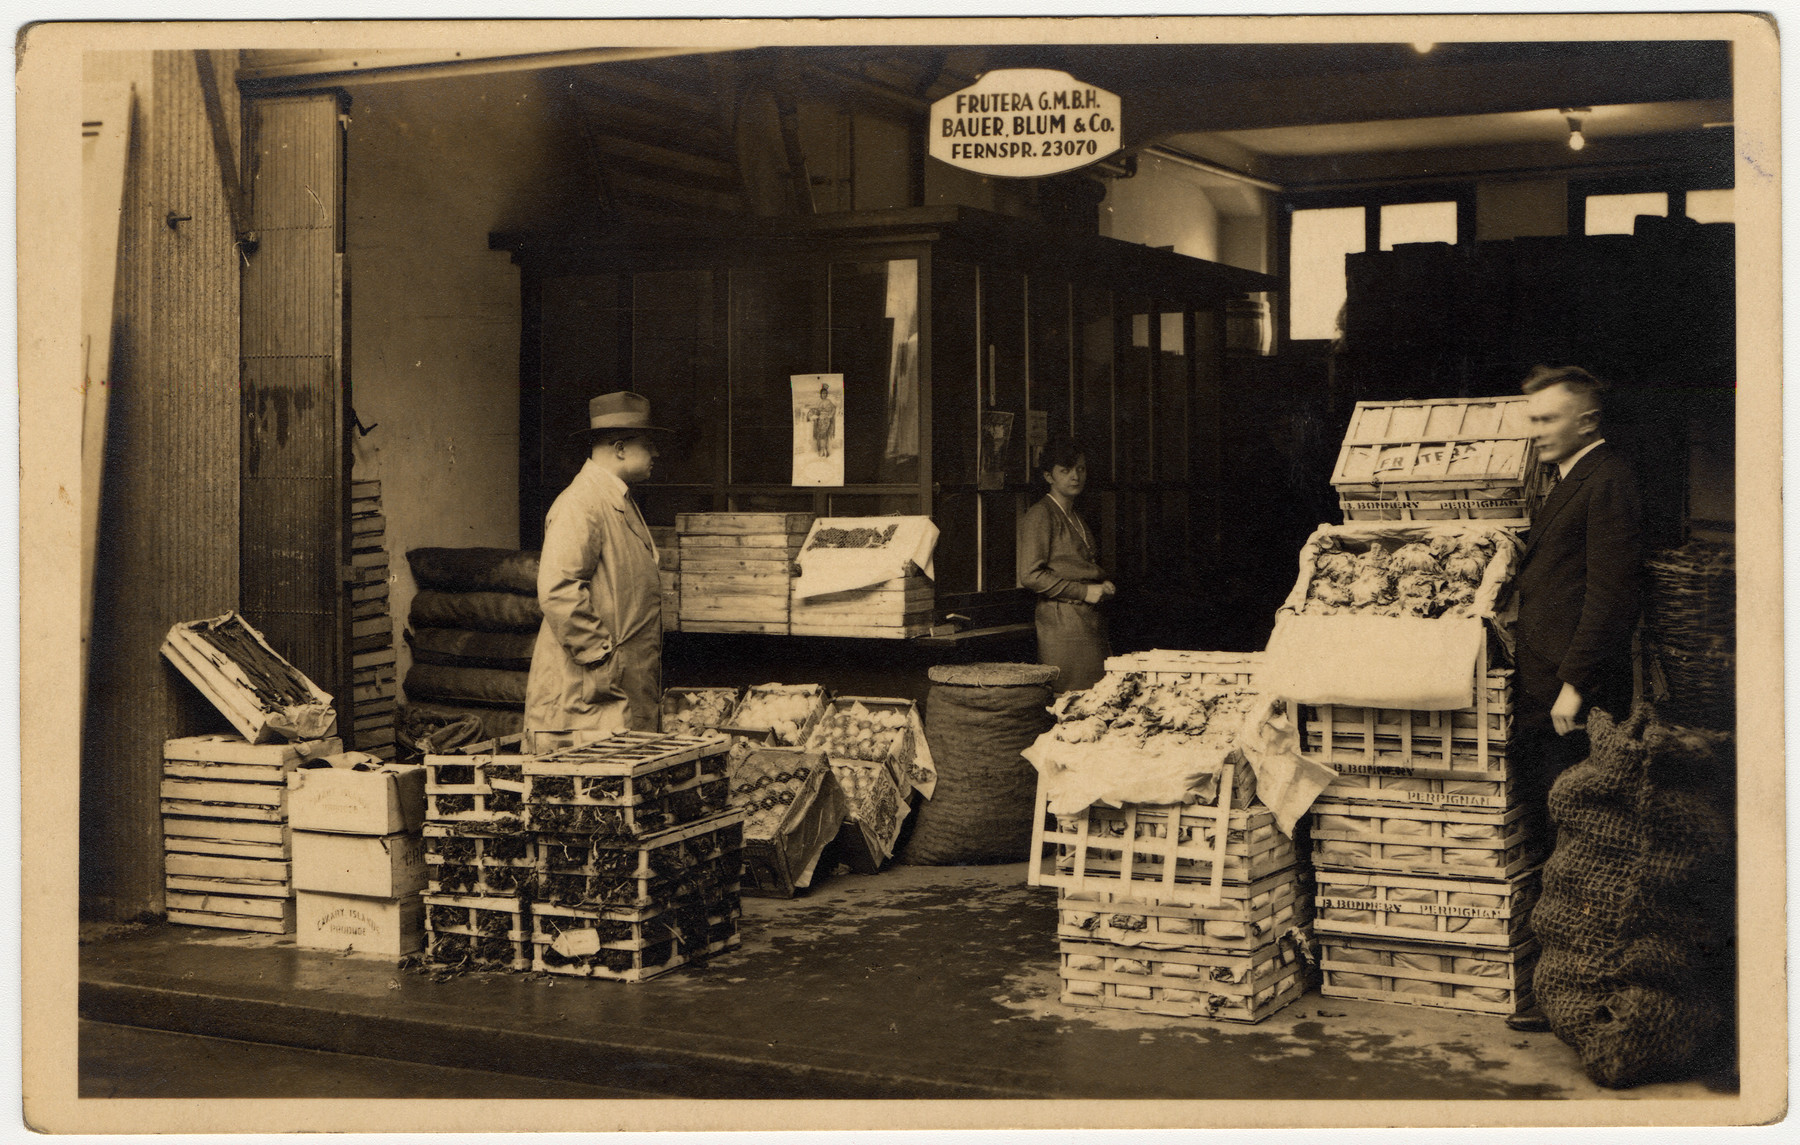 Two men and a woman work instide the Bauer, Blum and Co. Frutera amid crates of fruit and vegetables.